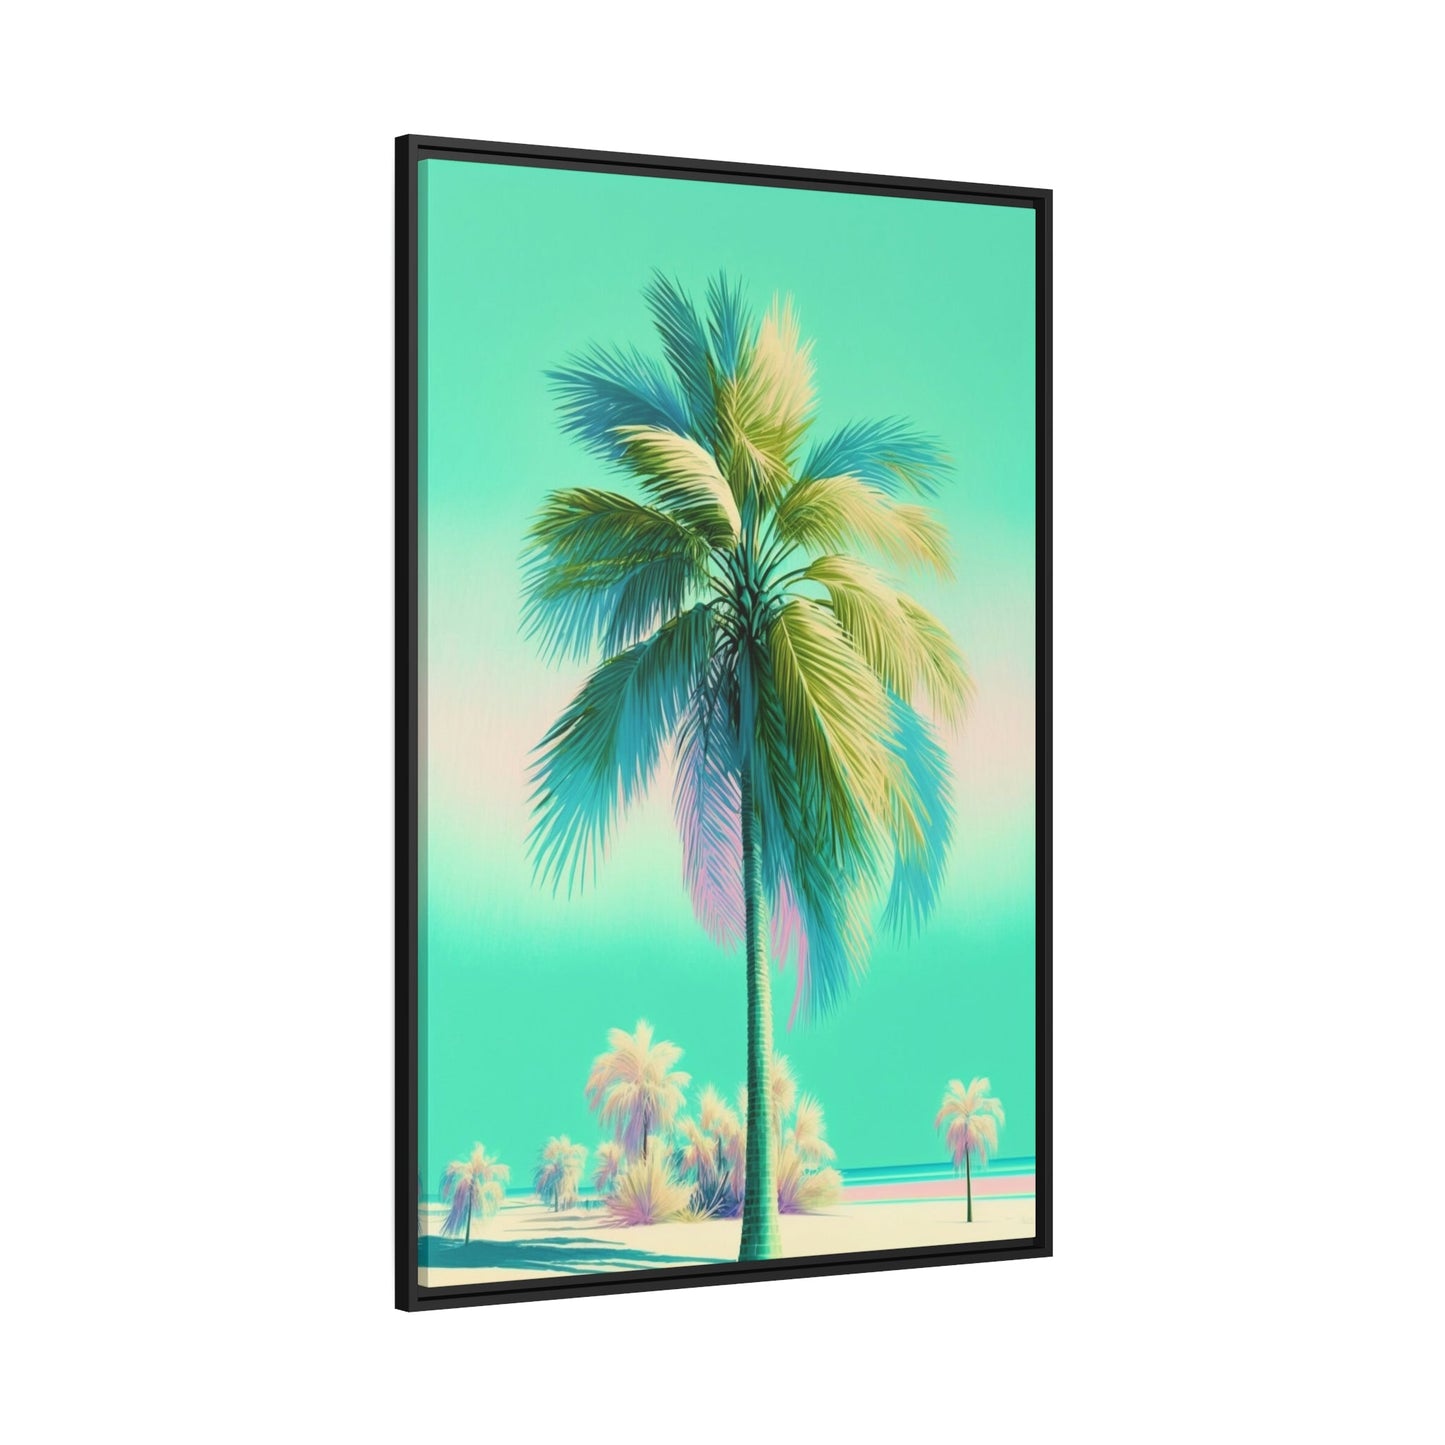 Palm Trees Art: Capture the Tranquil Beauty of Nature on Canvas